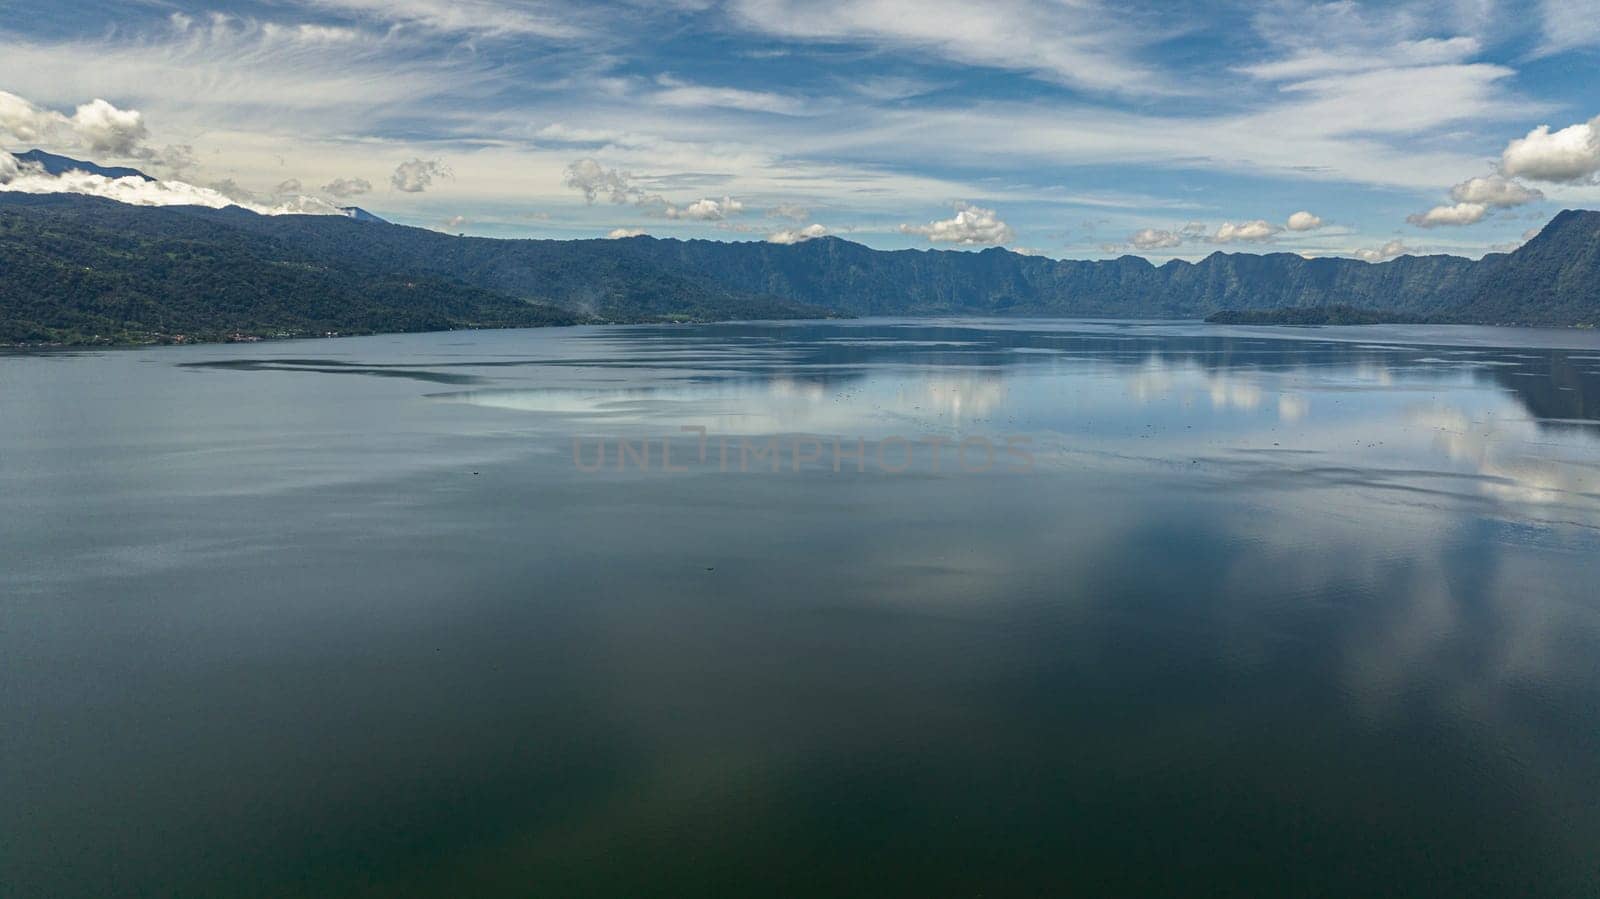 Beautiful lake Maninjau in mountains. Tropical landscape with mountains and a lake. Sumatra, Indonesia.